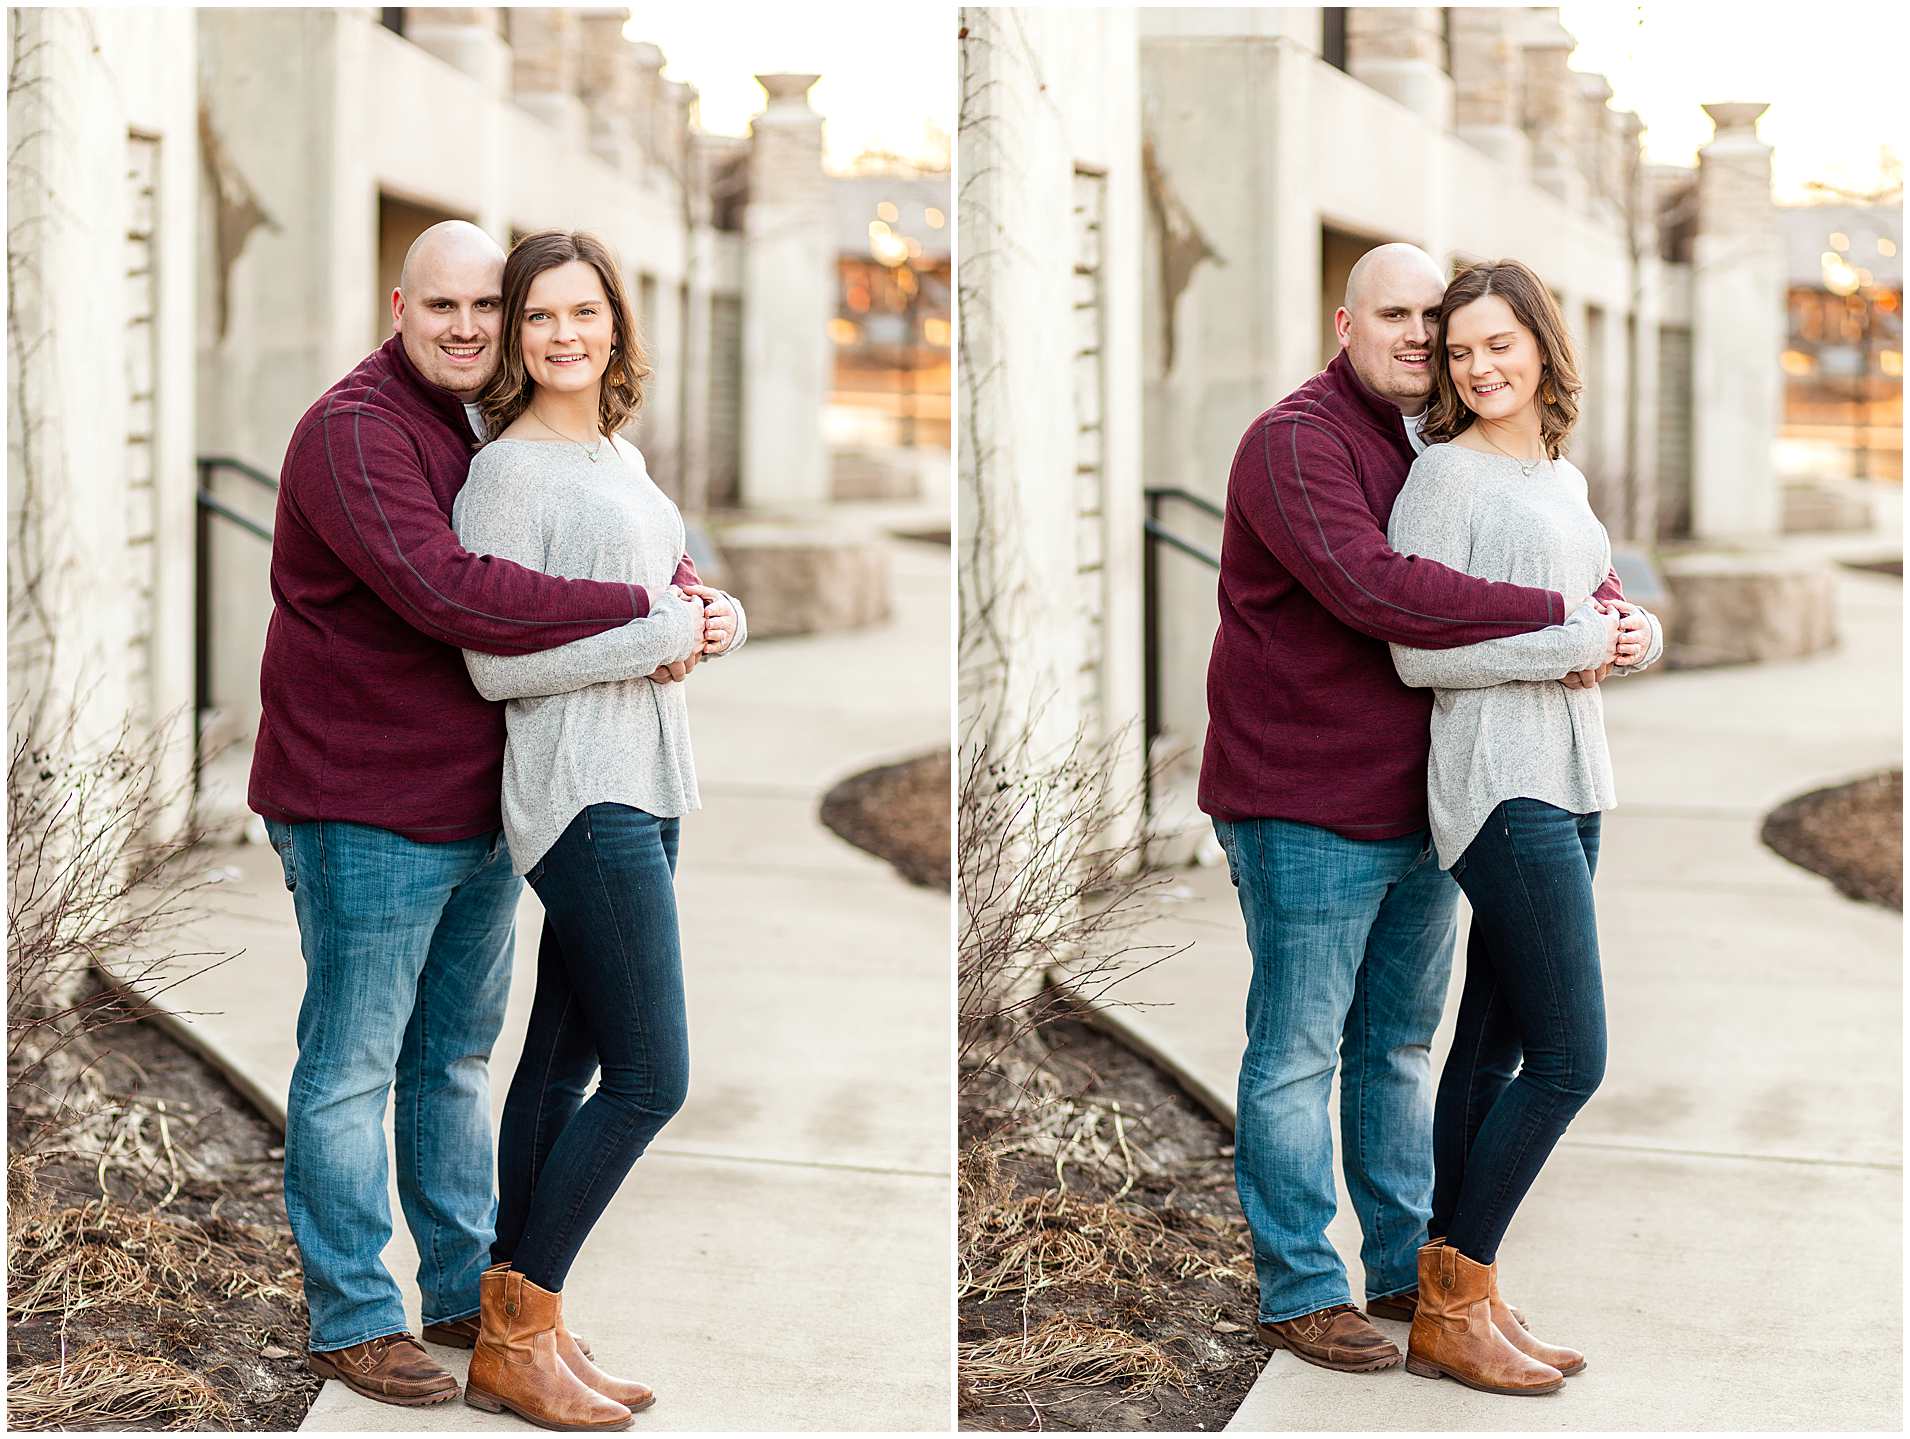 Engagement-In-Naperville-Illinois-Best-Chicago-Suburbs-Engagement-Photo-Locations